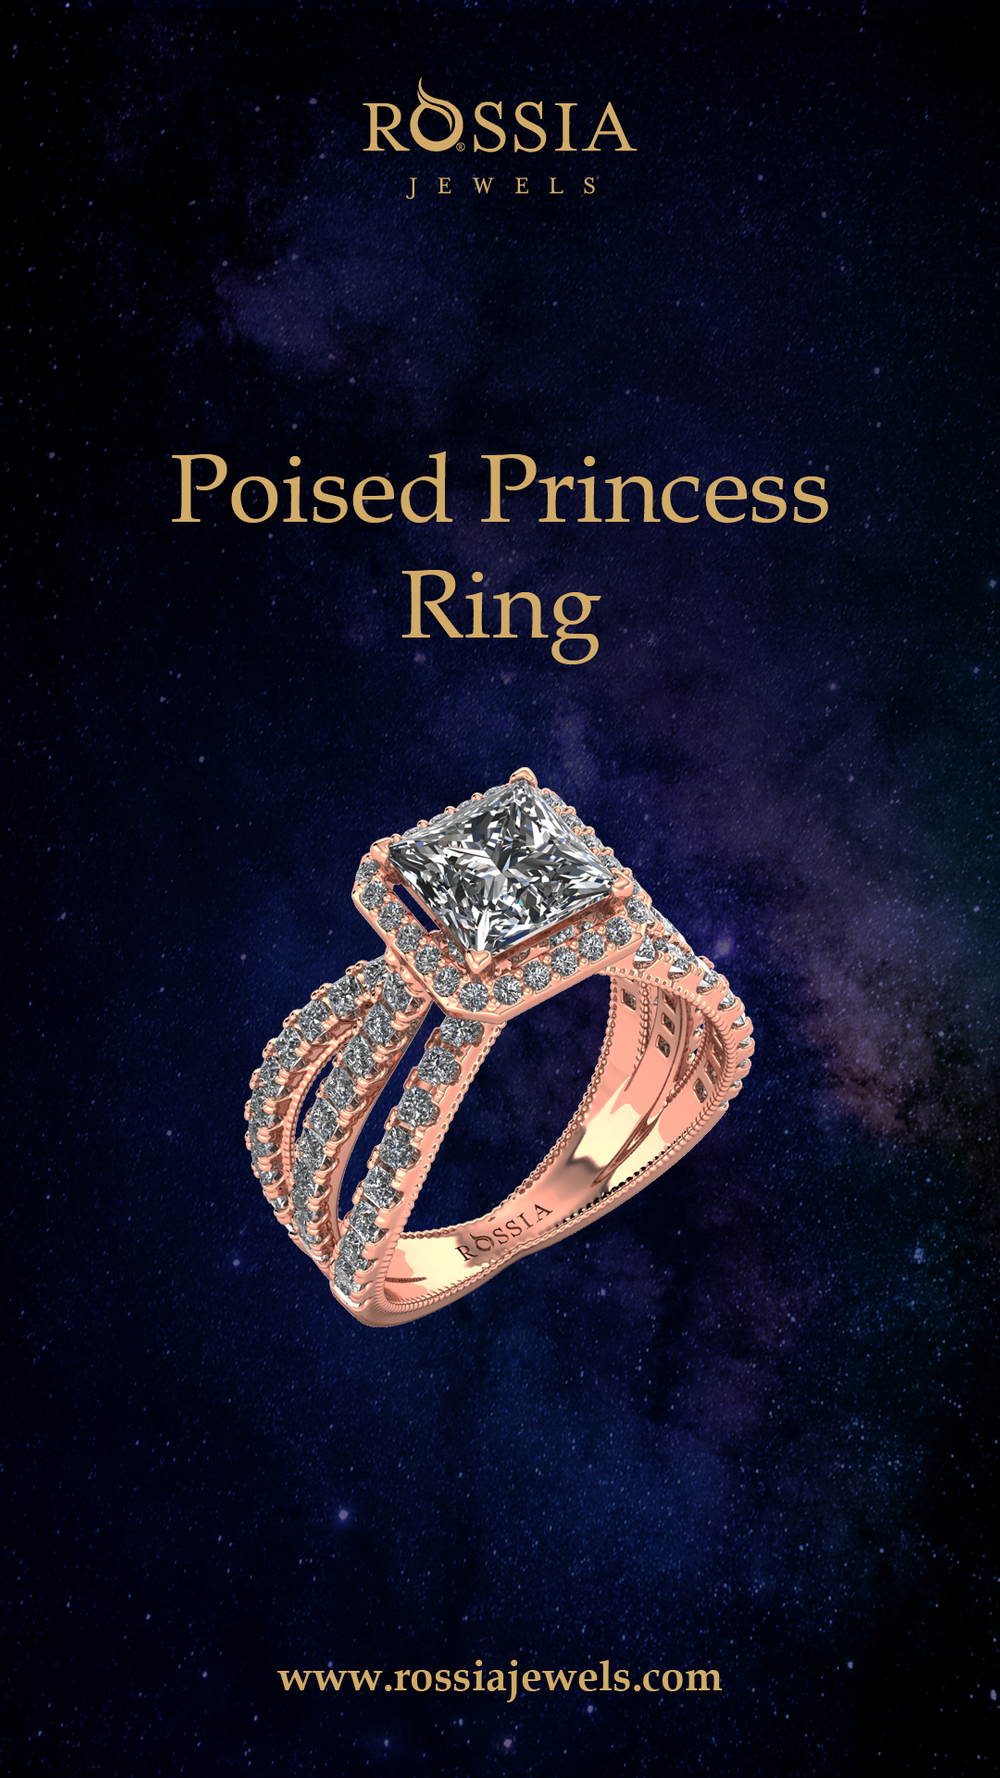 Photo From Engagement Rings - By Rossia Jewels